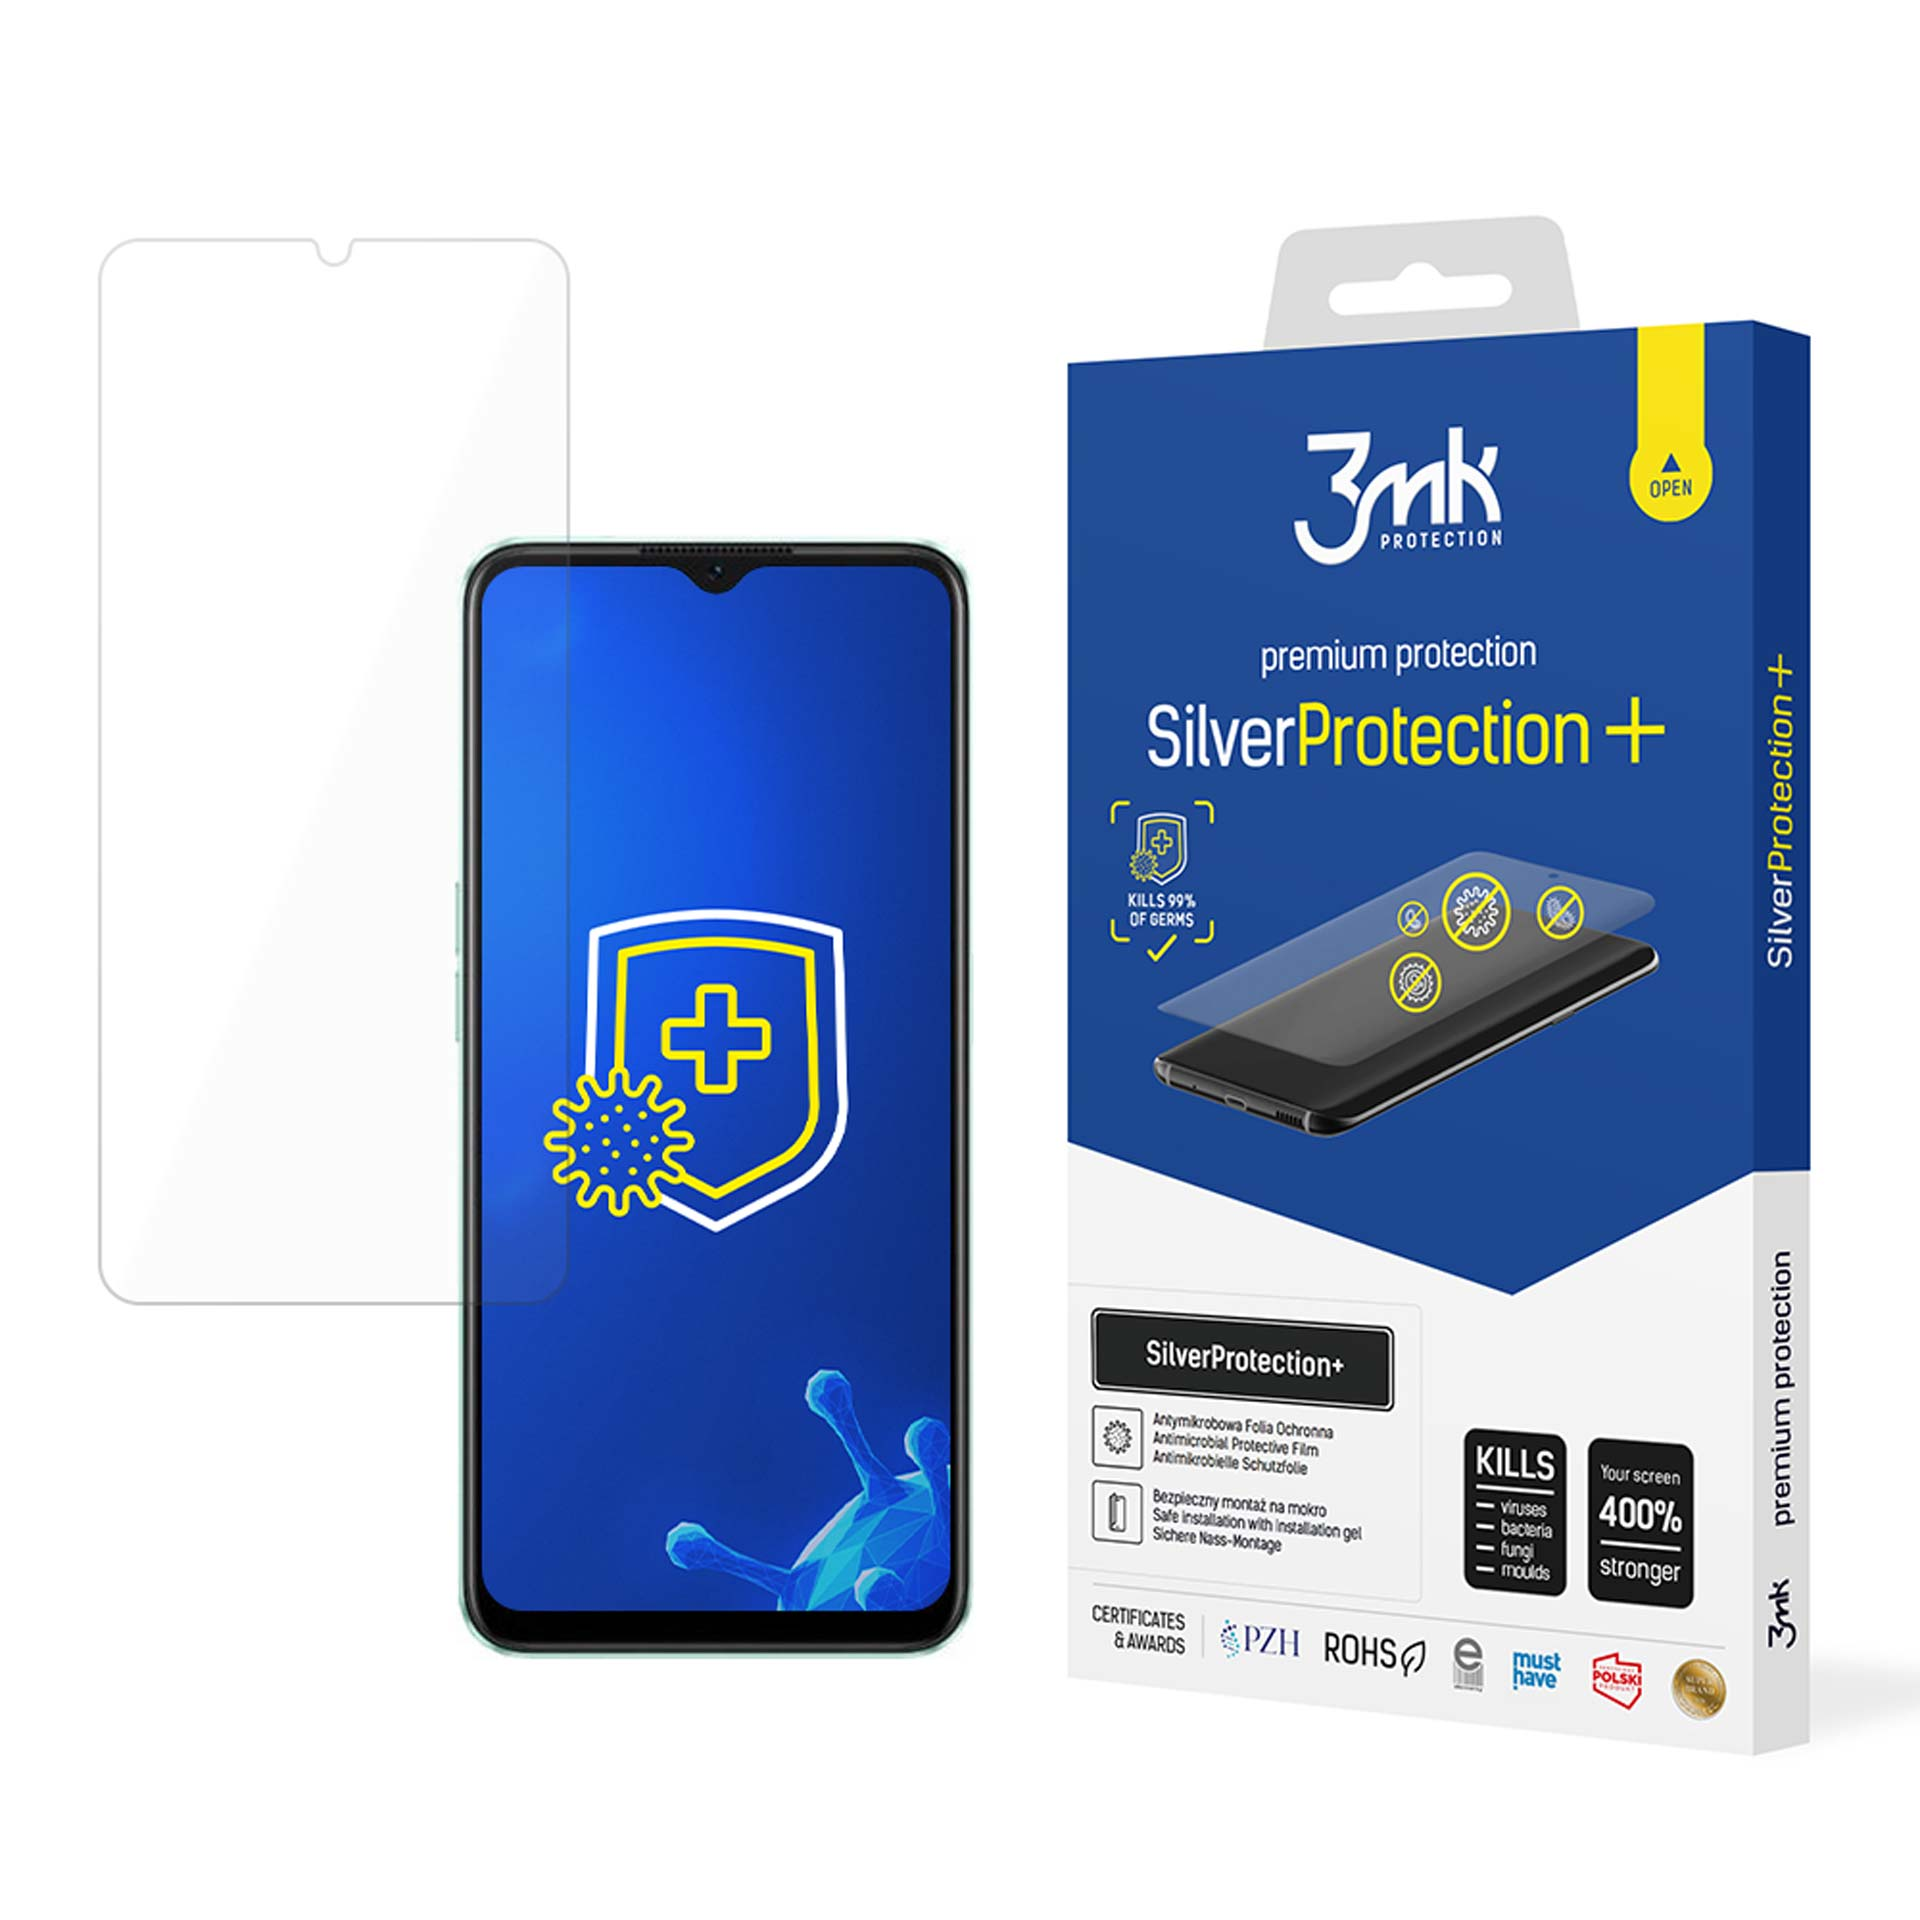 3MK Oppo A57 Oppo 3mk - 5G/A57e/A57s) 5G/A57e/A57s Folie(für A57 SilverProtection+ 4G/A57 4G/A57 Oppo